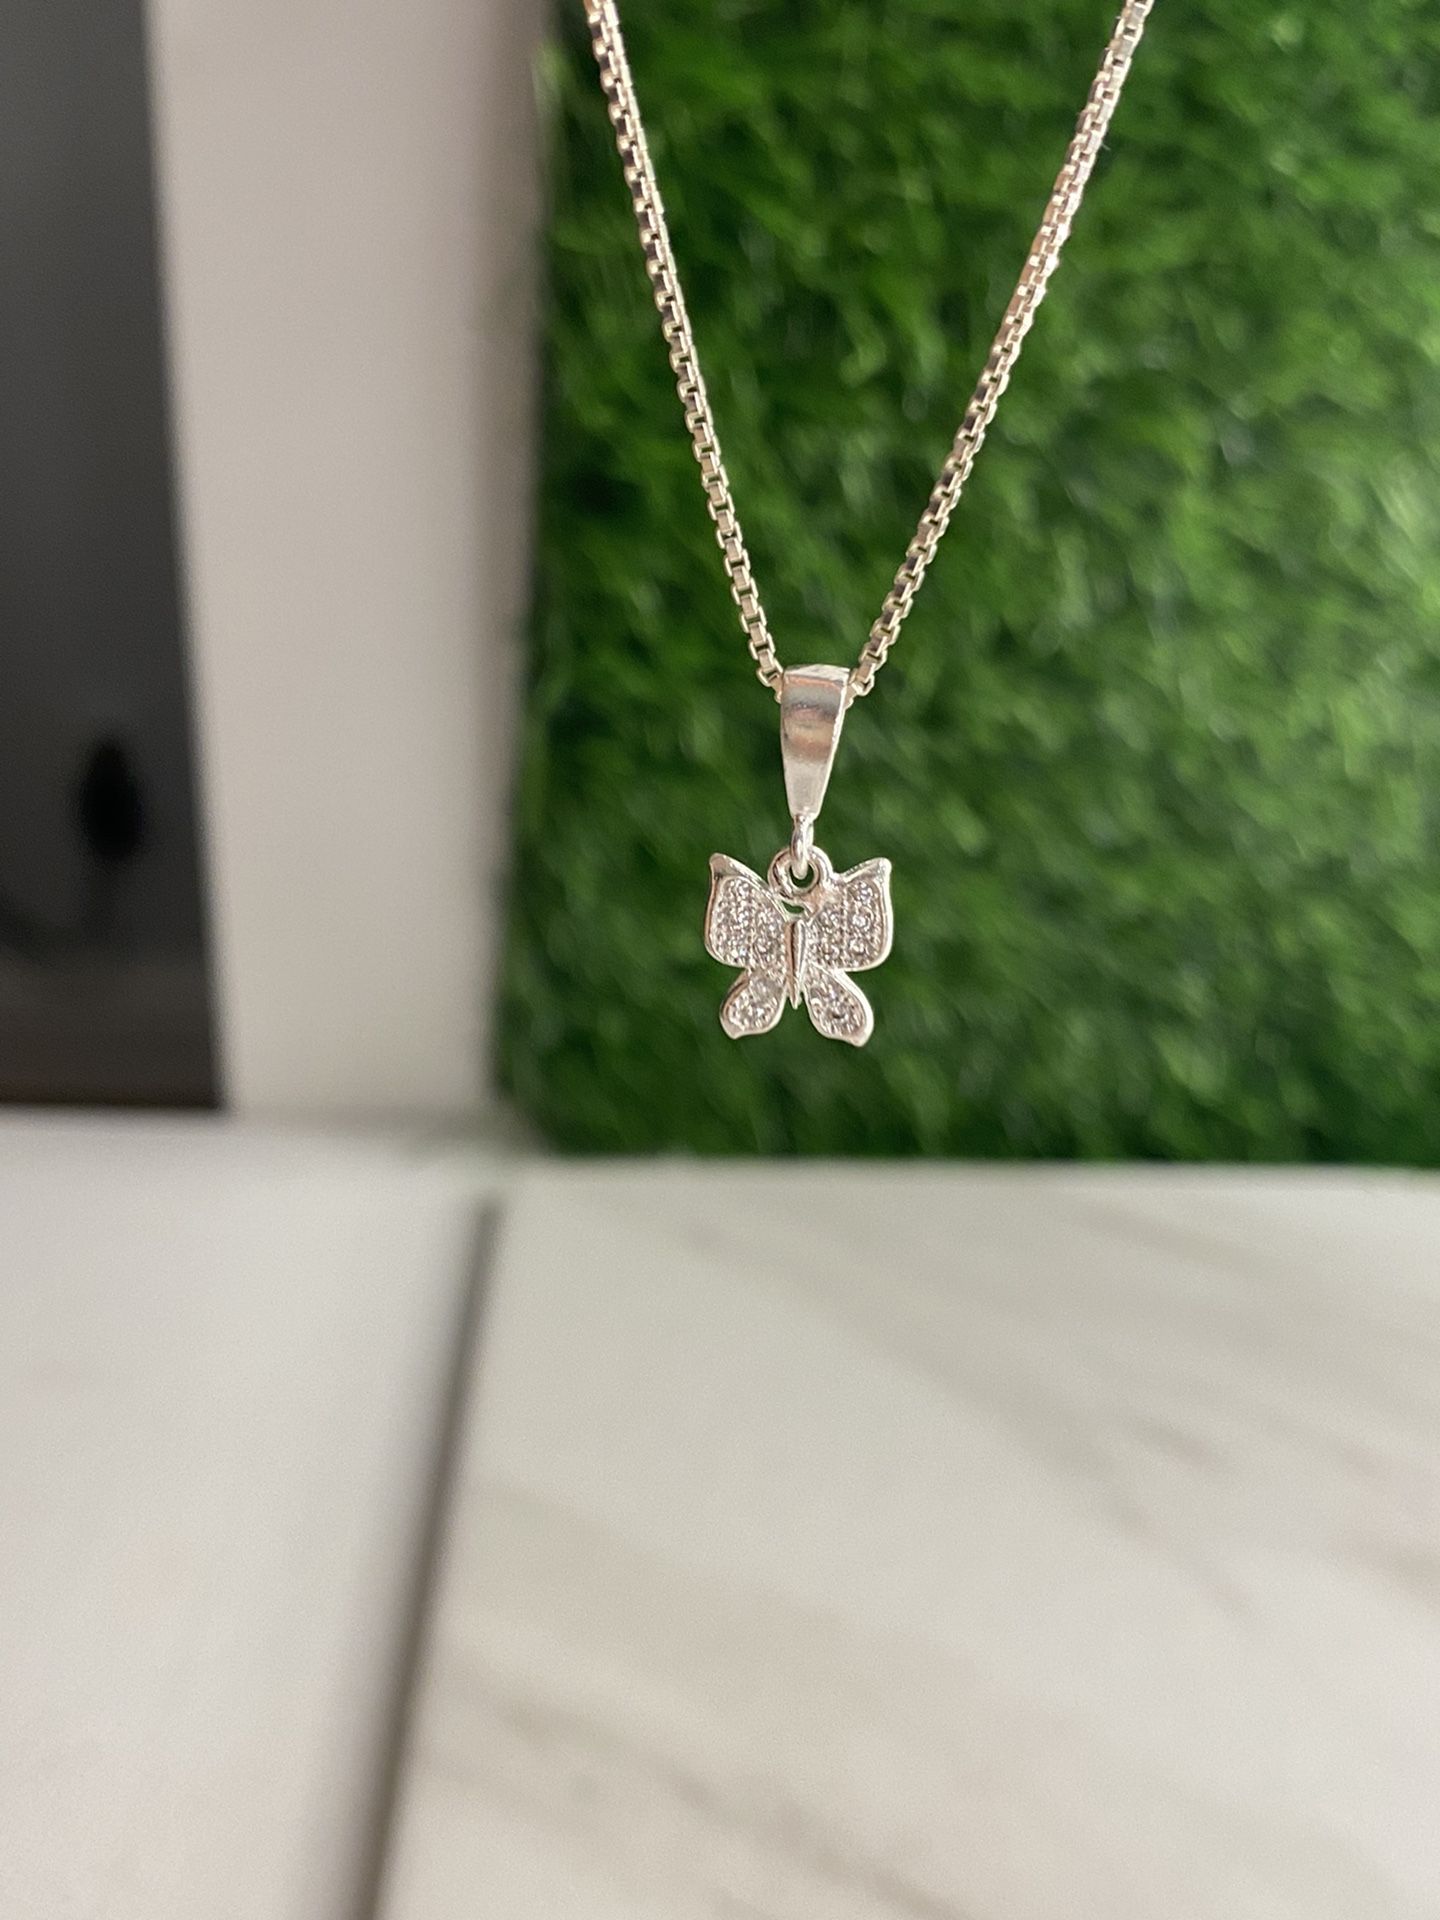 Silver Butterfly Necklace🦋 